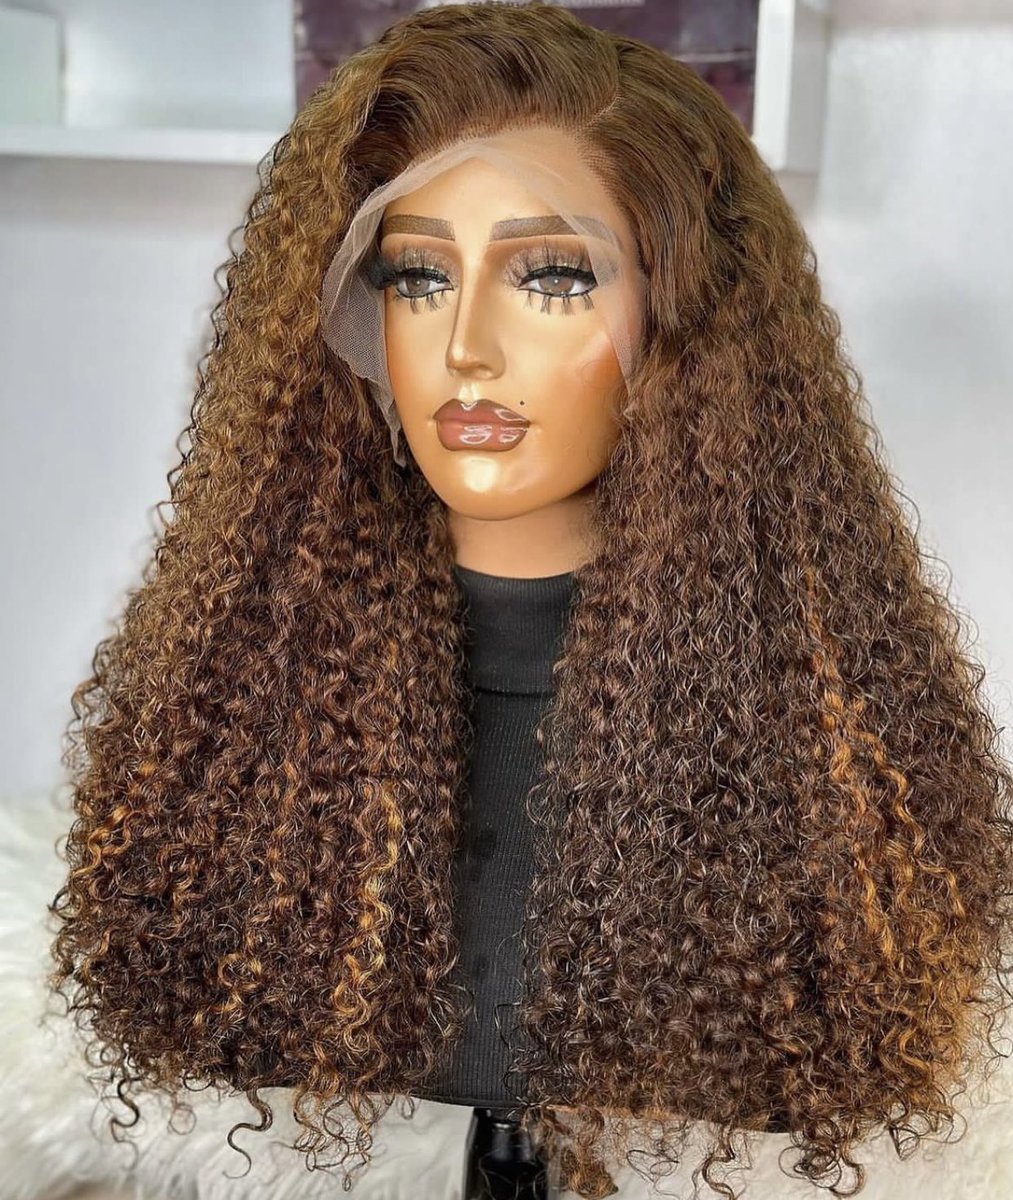 This Sdd Piano pixie in 20” paired with Matching Frontal gives you that Diva look 
(300grams)

Price:- N350,000 ❌, Now N295,000✅ (Subjected to change)

#pianopixiecurls #pianopixiewig #longpixie #curlywig #2tonepixie #customwigs #Factorycurlywig #wigsinlagos  #wigstore